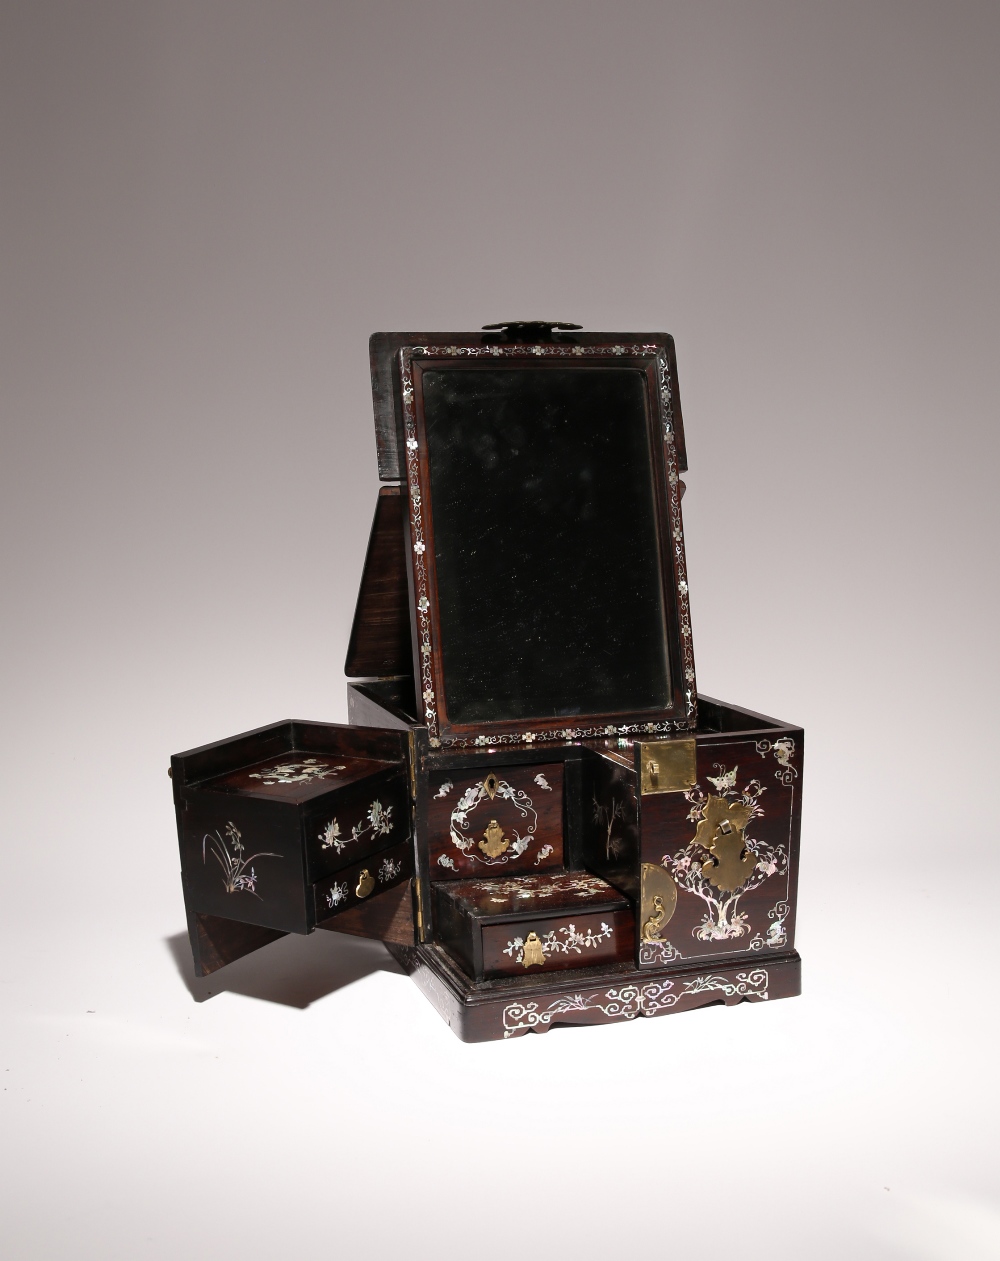 A CHINESE HARDWOOD AND MOTHER OF PEARL INLAID LADY'S TOILET BOX 19TH CENTURY With a hinged lid